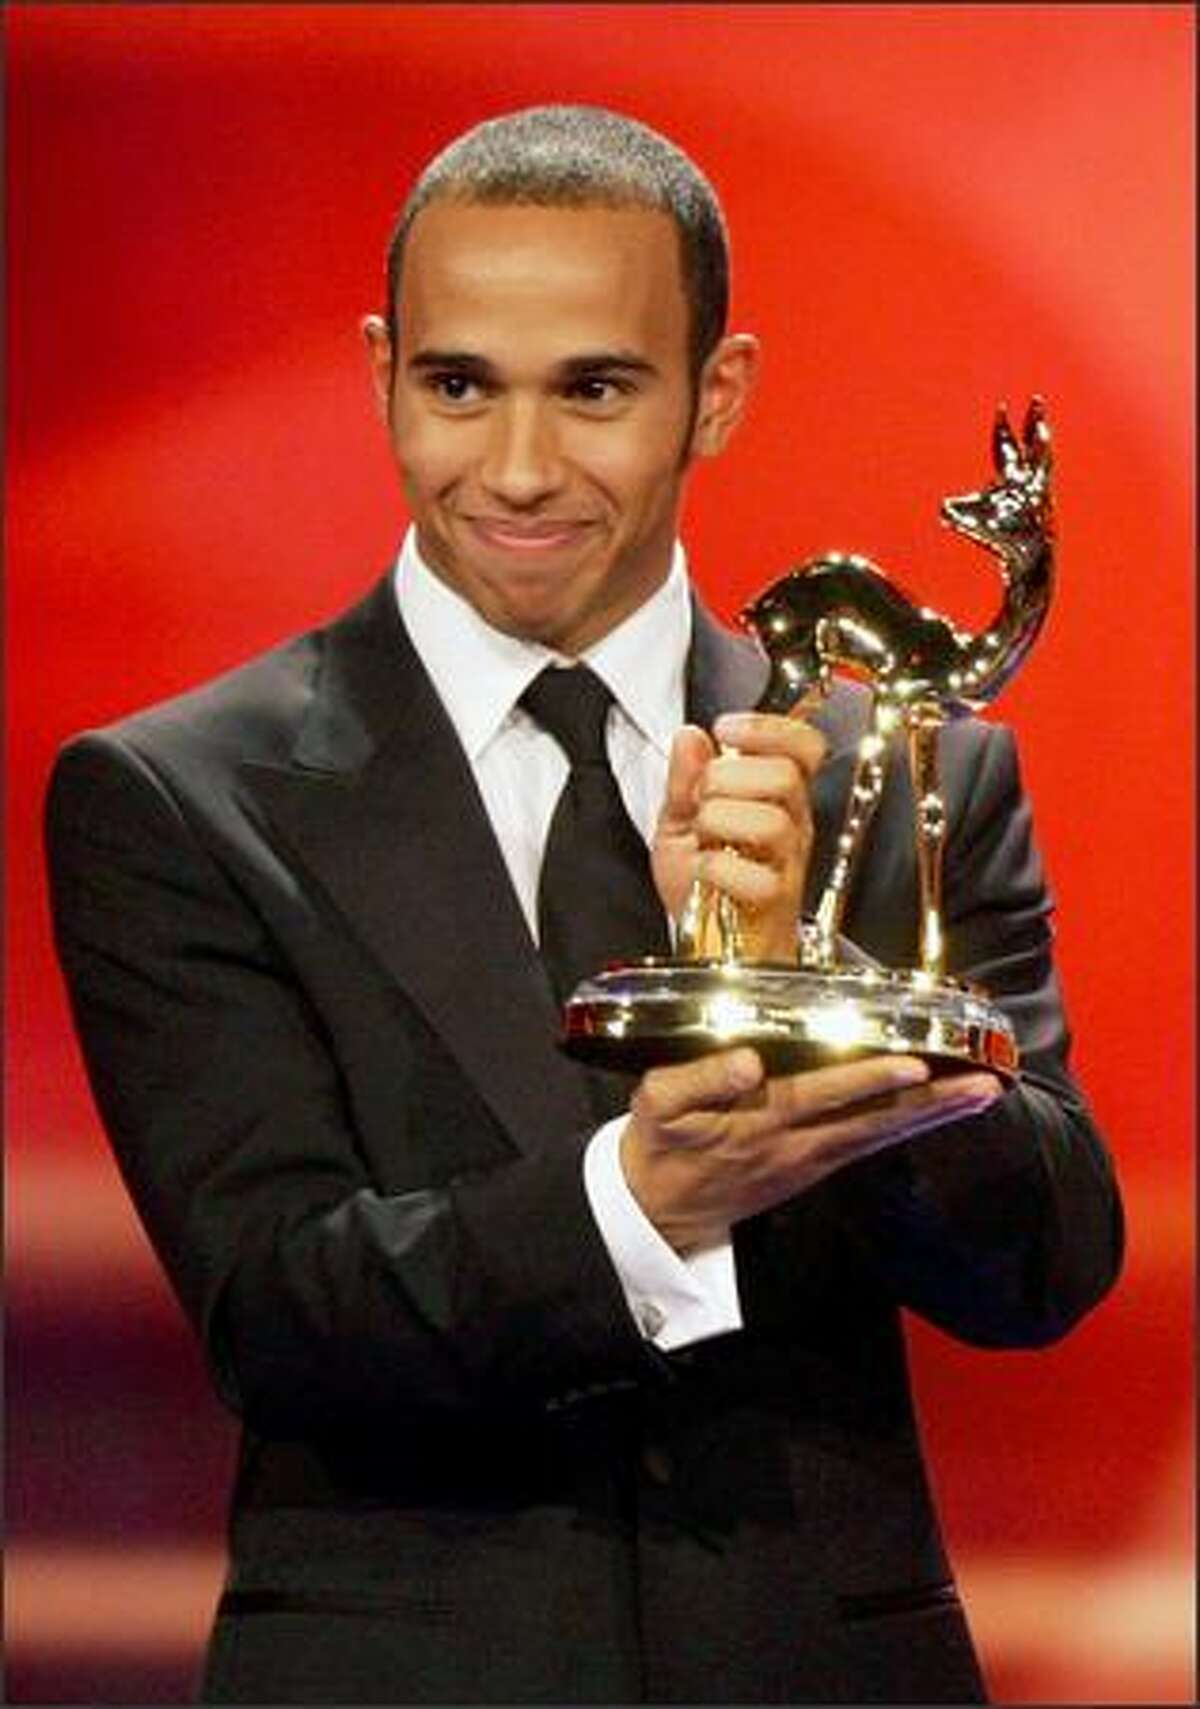 Formula One driver Lewis Hamilton recieves the Special Jury Bambi at the 60th Bambi Awards on Thursday in Offenburg, Germany. The awards ceremony takes place every year under the patronage of German publisher Hubert Burda and awards nominees in the sectors of communication, entertainment and show business as well as economy, politics and sports.